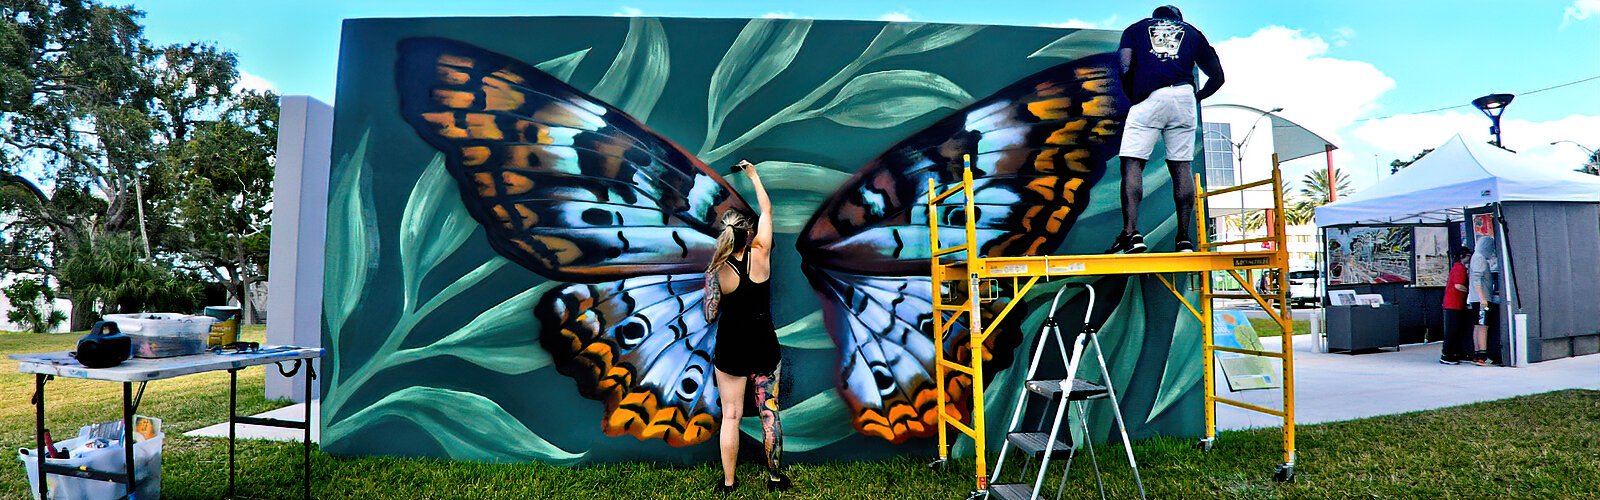 Artist Alyssa Dunlap puts the last touches to her live mural painting created for the Art in the Park celebration at Coachman Park in Clearwater in late October.